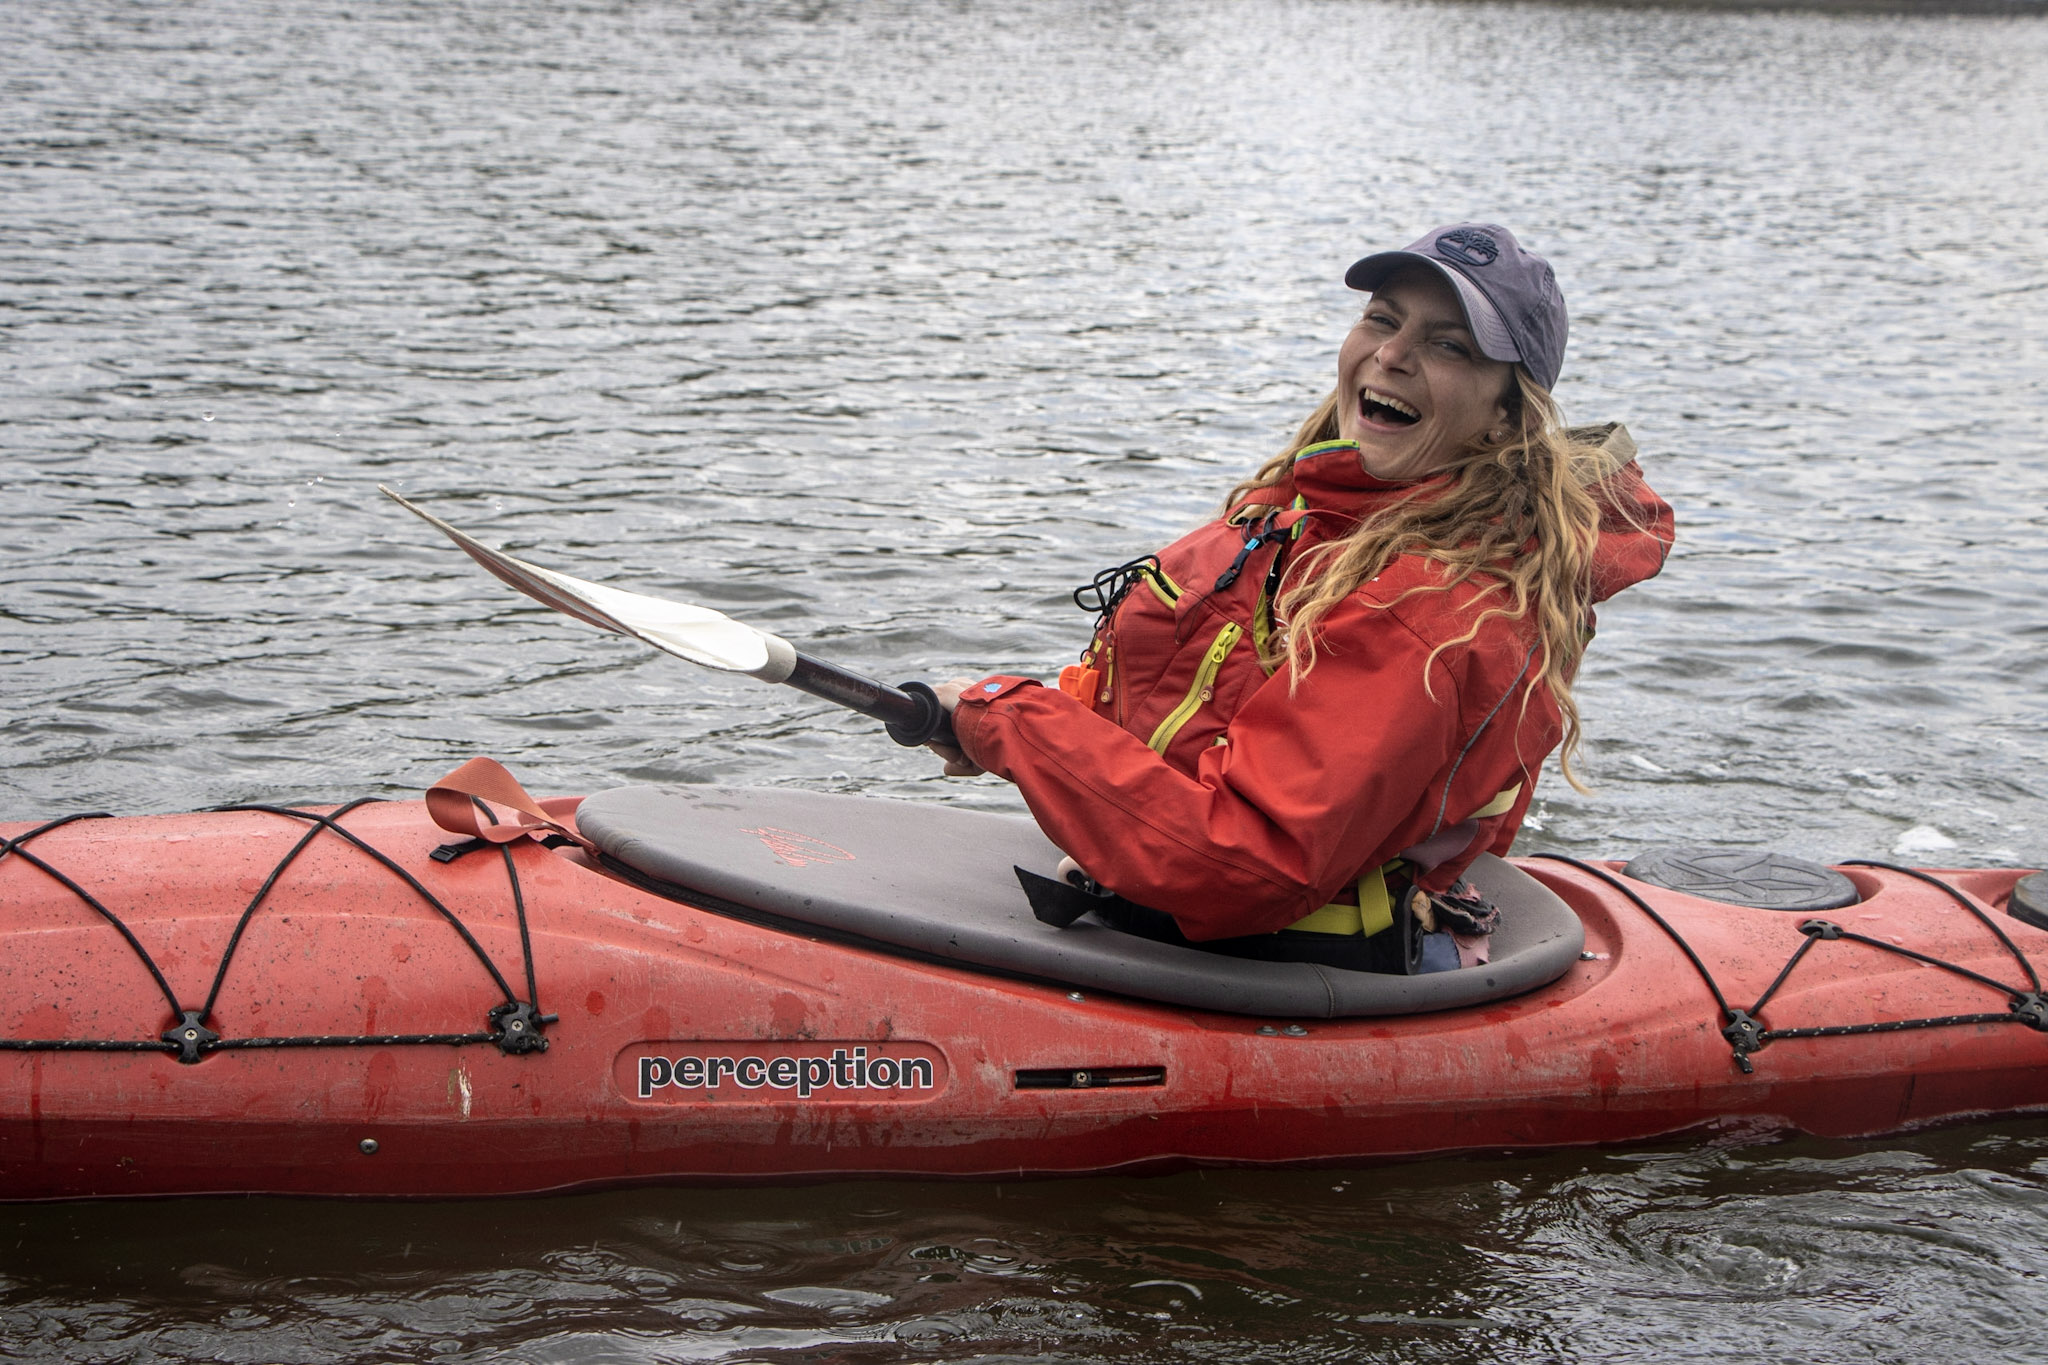 A lady learning to kayak and deliver kayaking sessions as part of an Outdoor Instructor Course